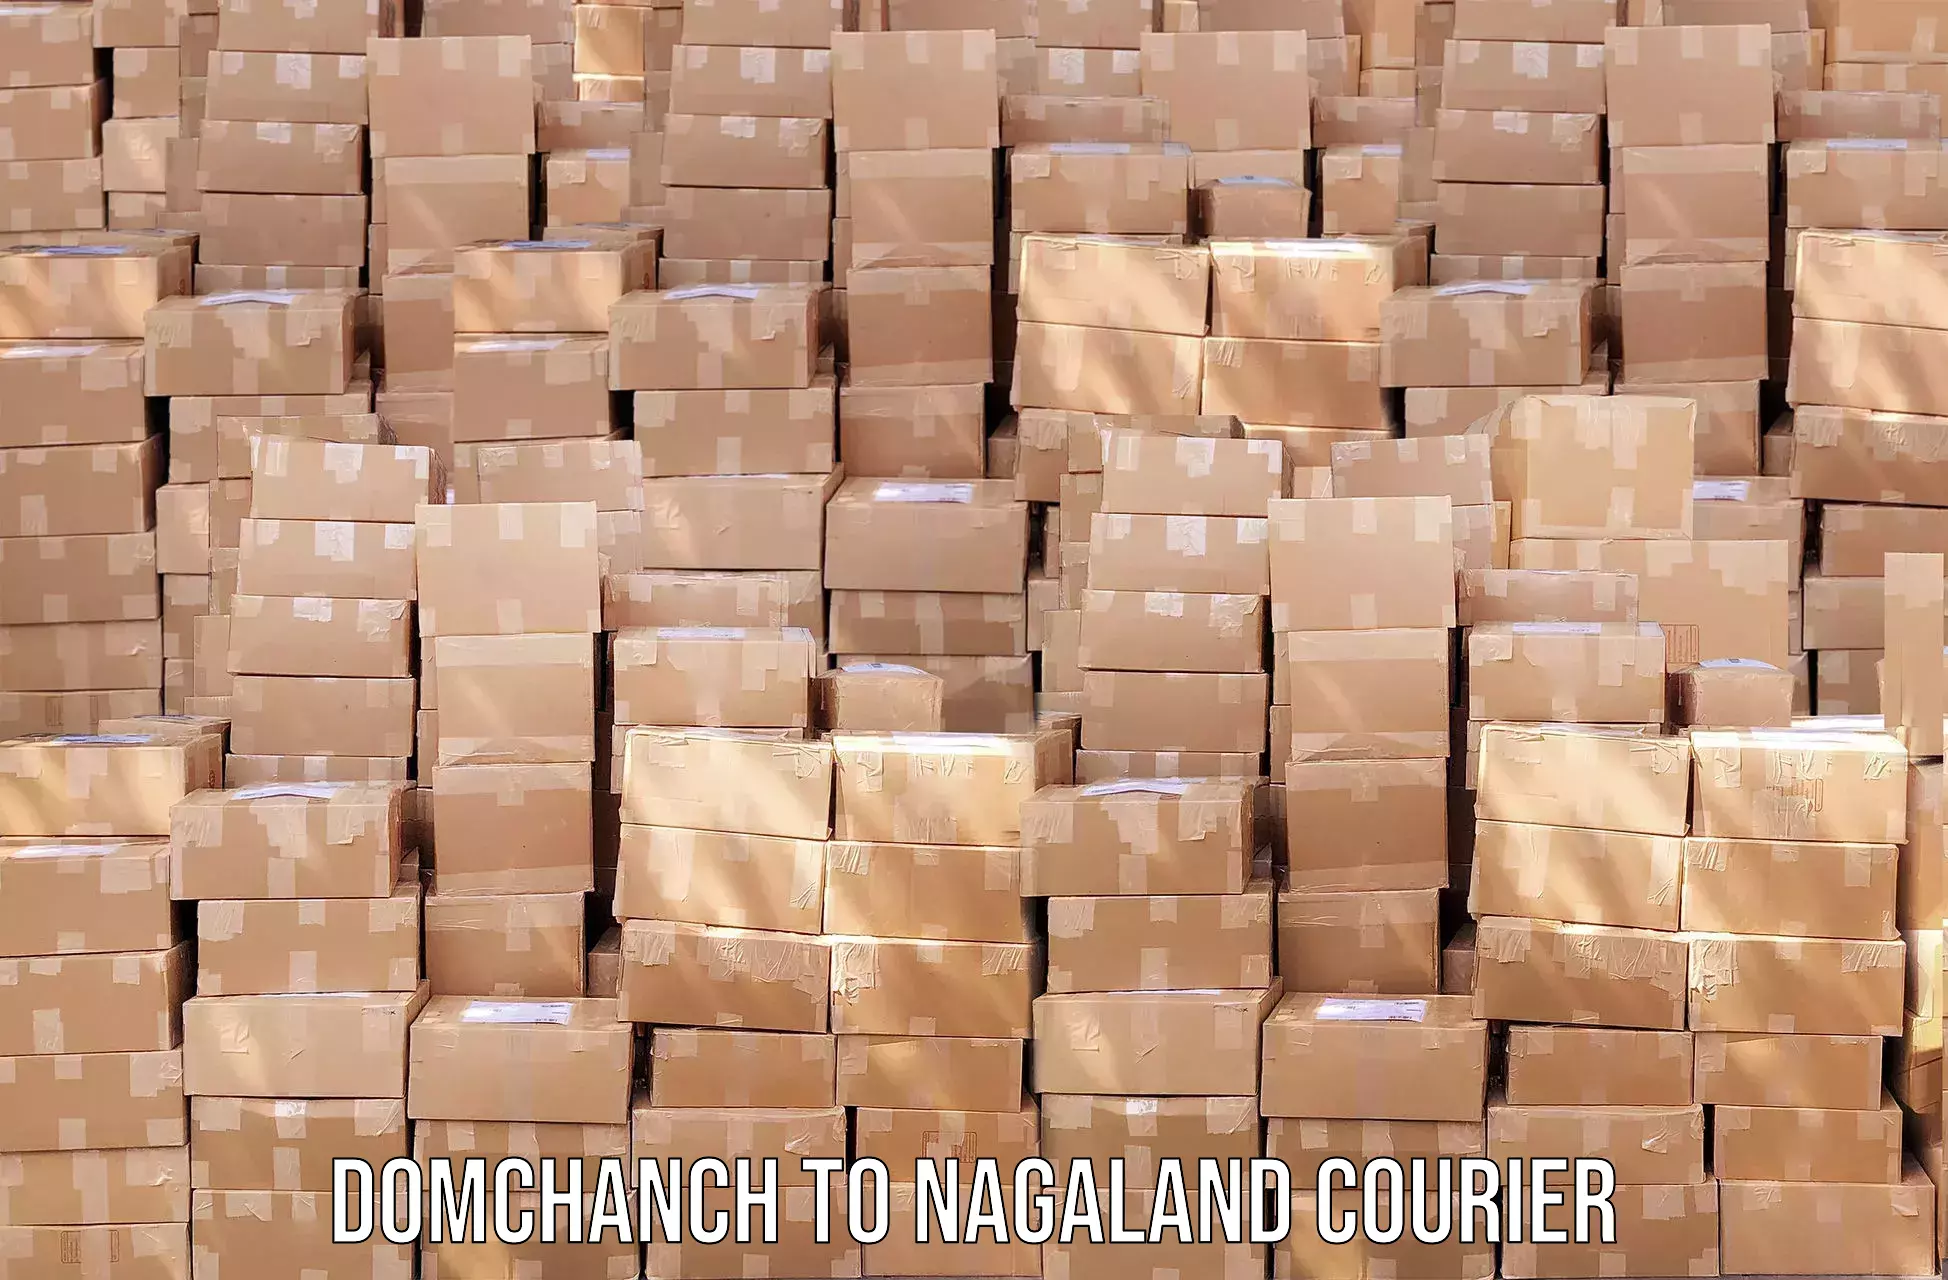 Multi-national courier services Domchanch to Kohima